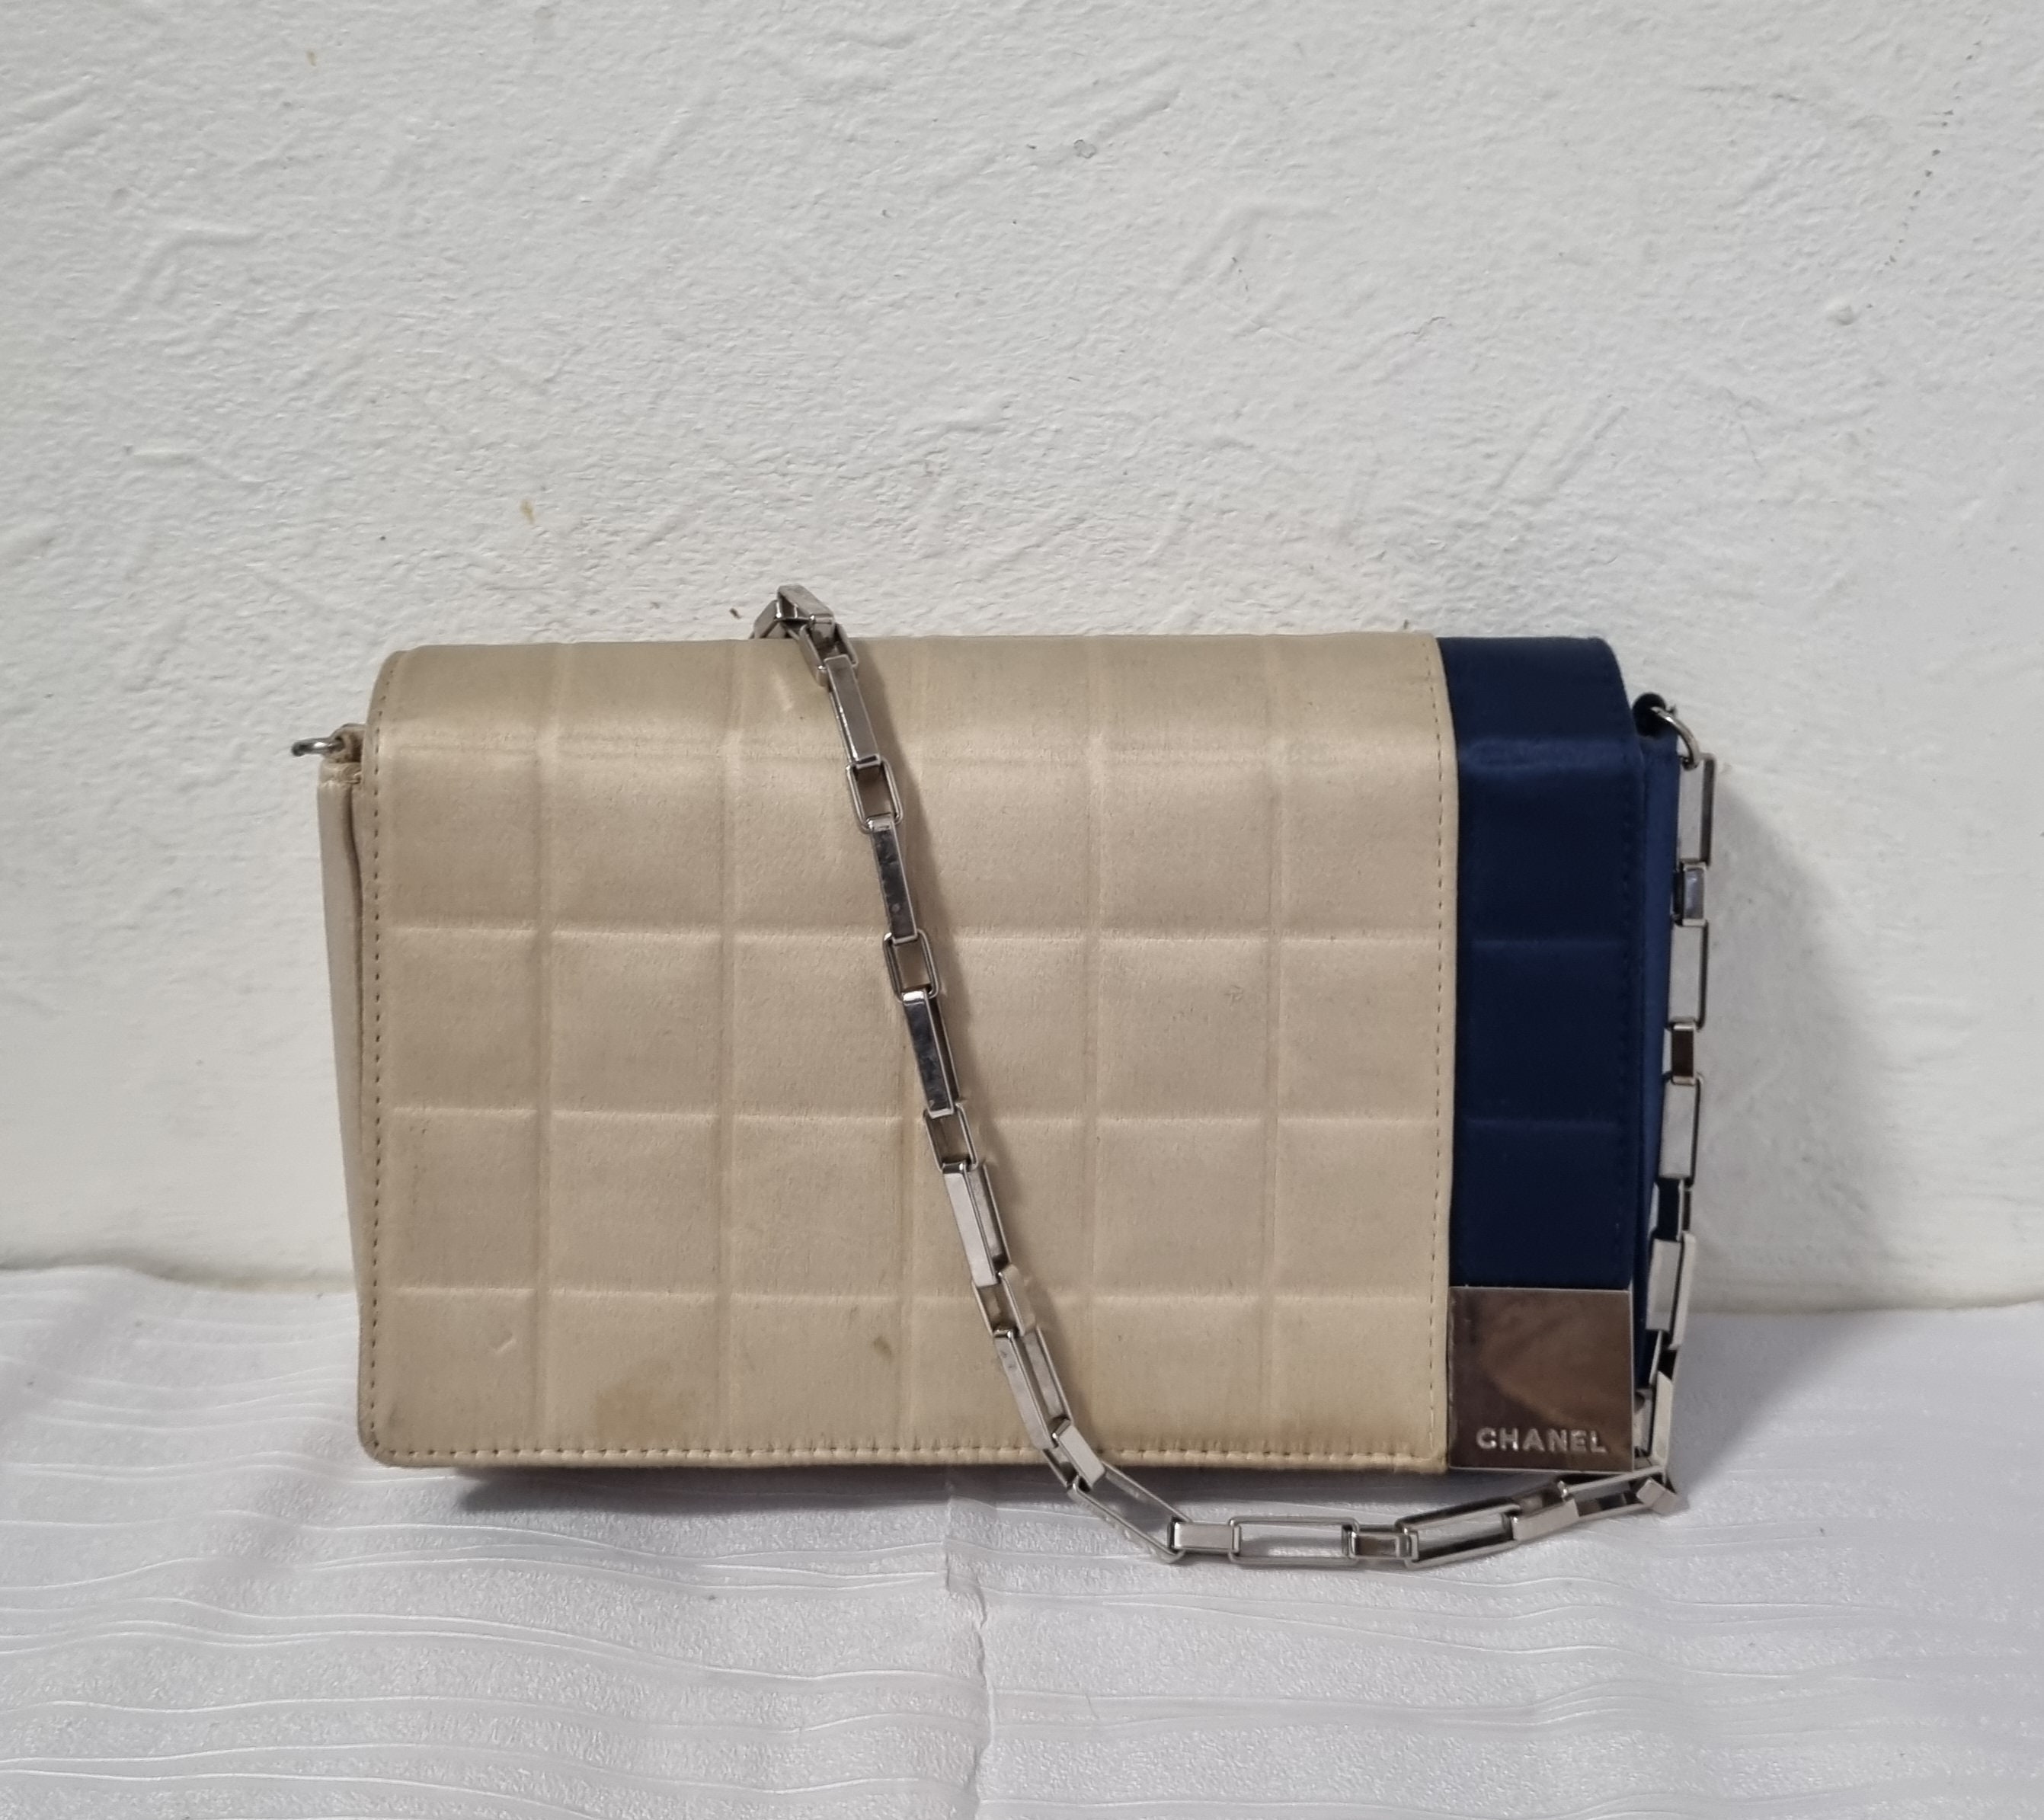 CHANEL Chocolate Bar BAG in Coco Printed Silk Quilted Ivory 